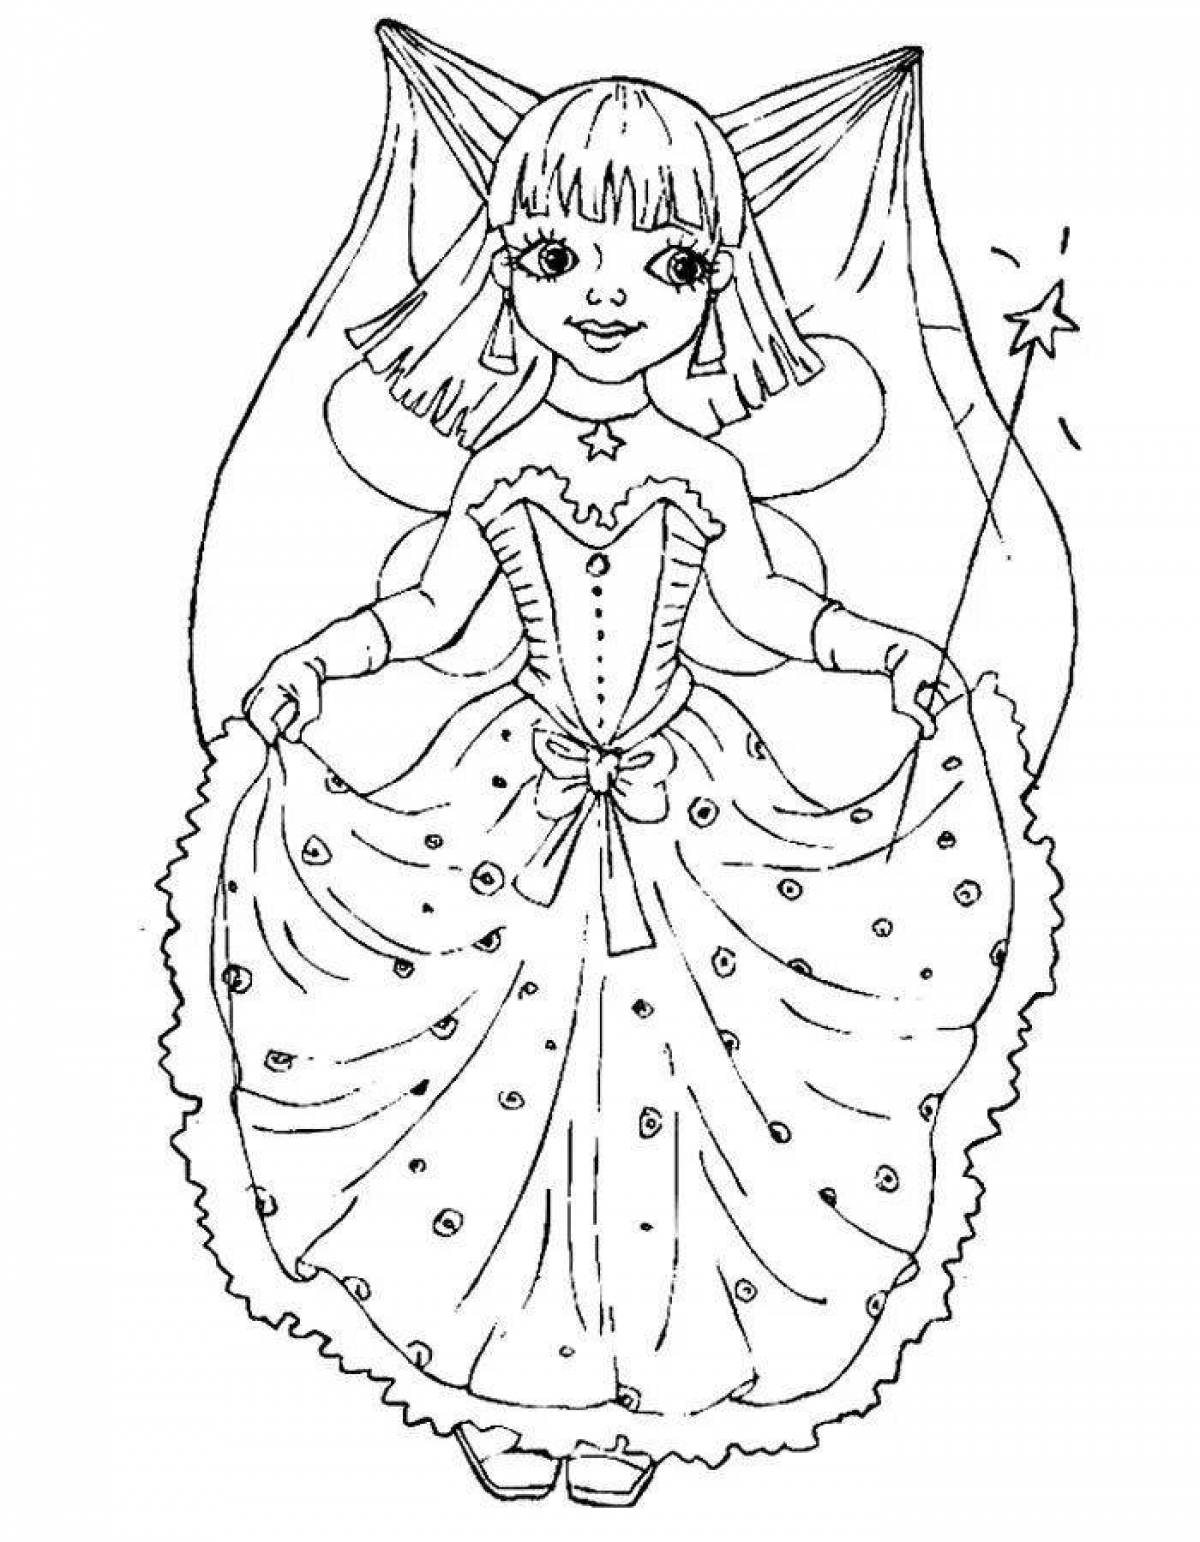 Exquisite sorceress coloring page